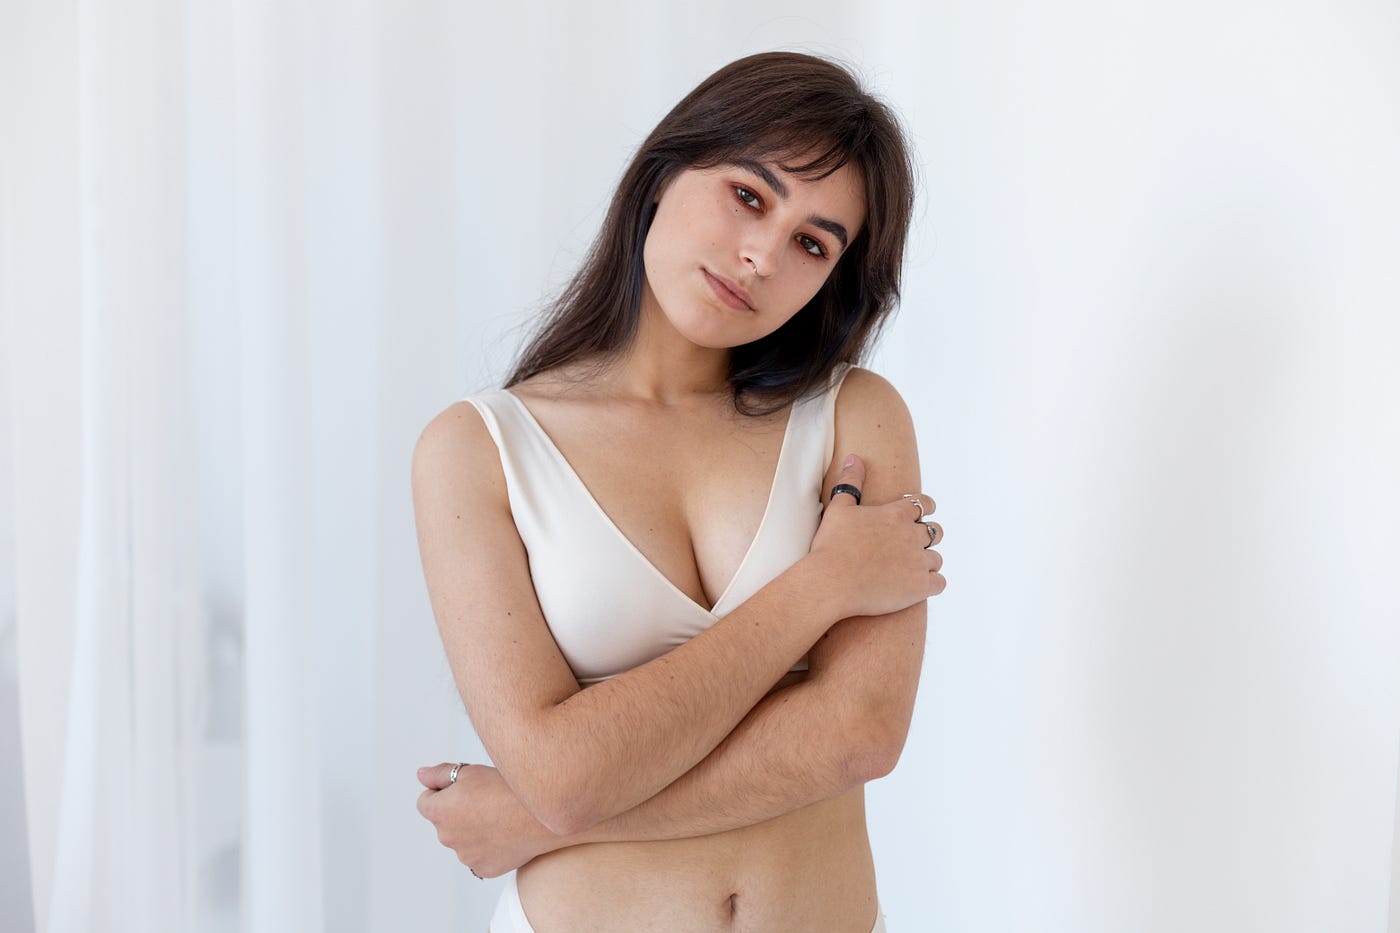 The Six Common Causes Of Breast Sagging